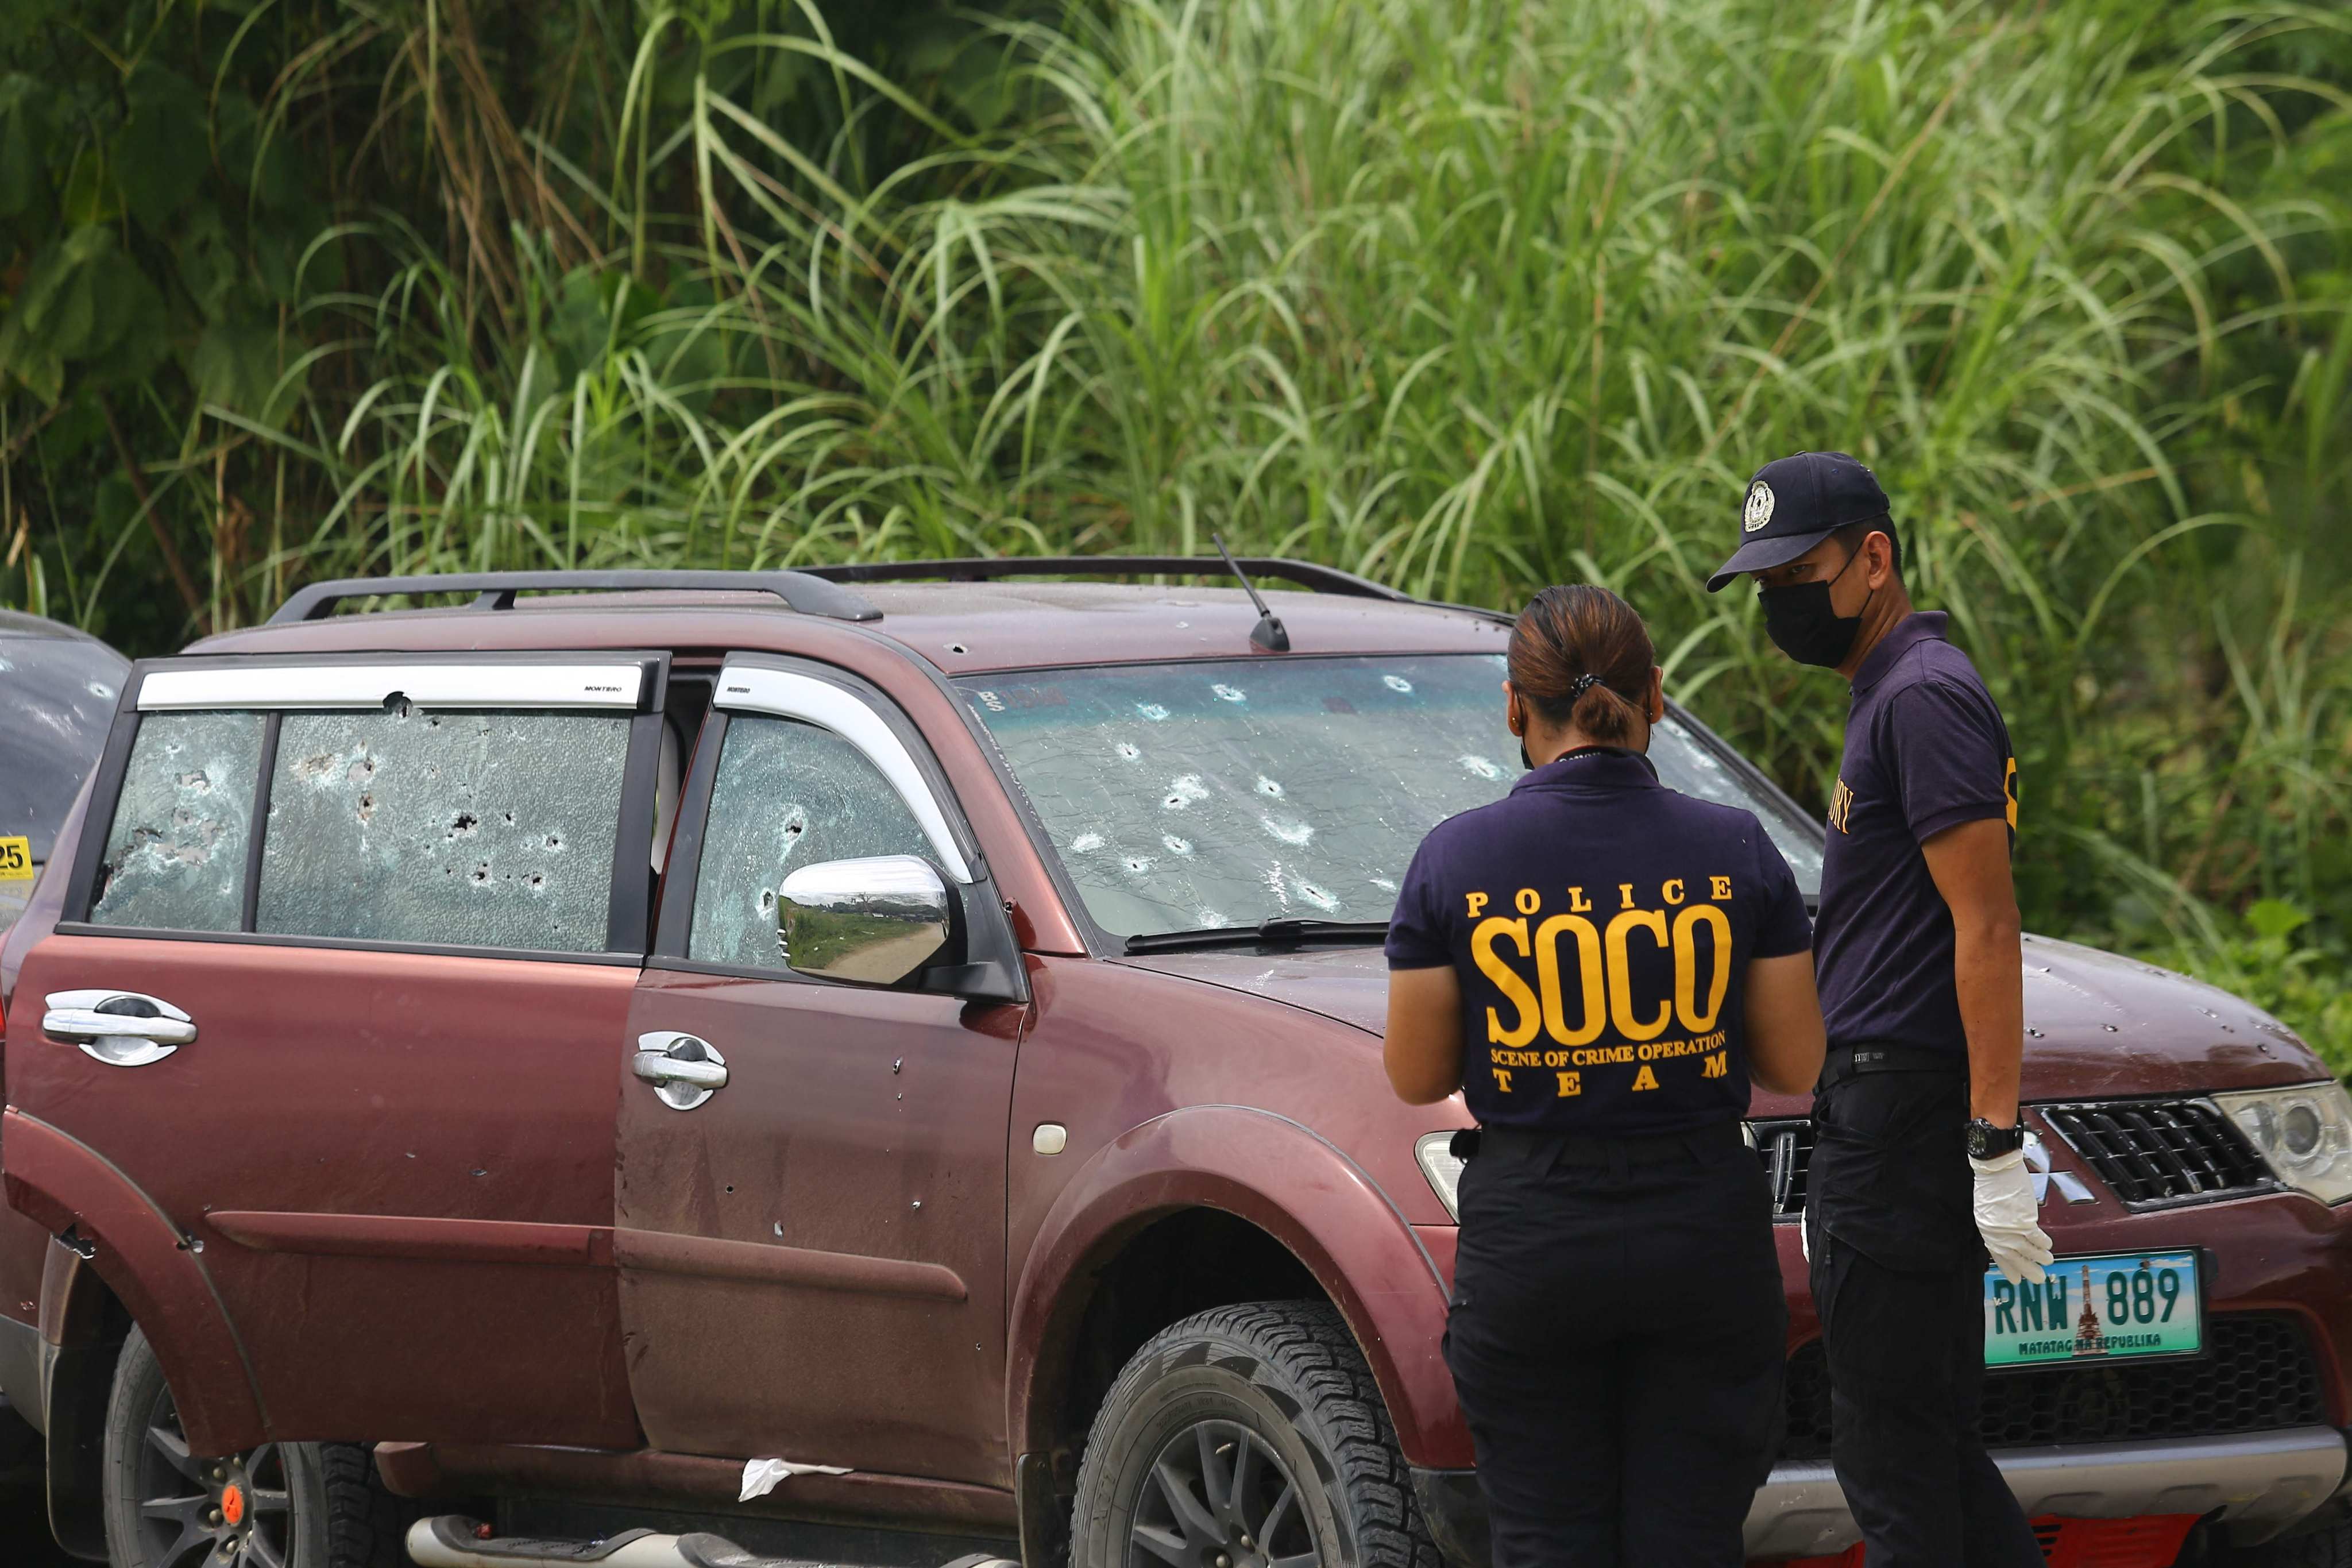 Philippine police look for evidence next to bullet-riddled vehicles. Photo: AFP